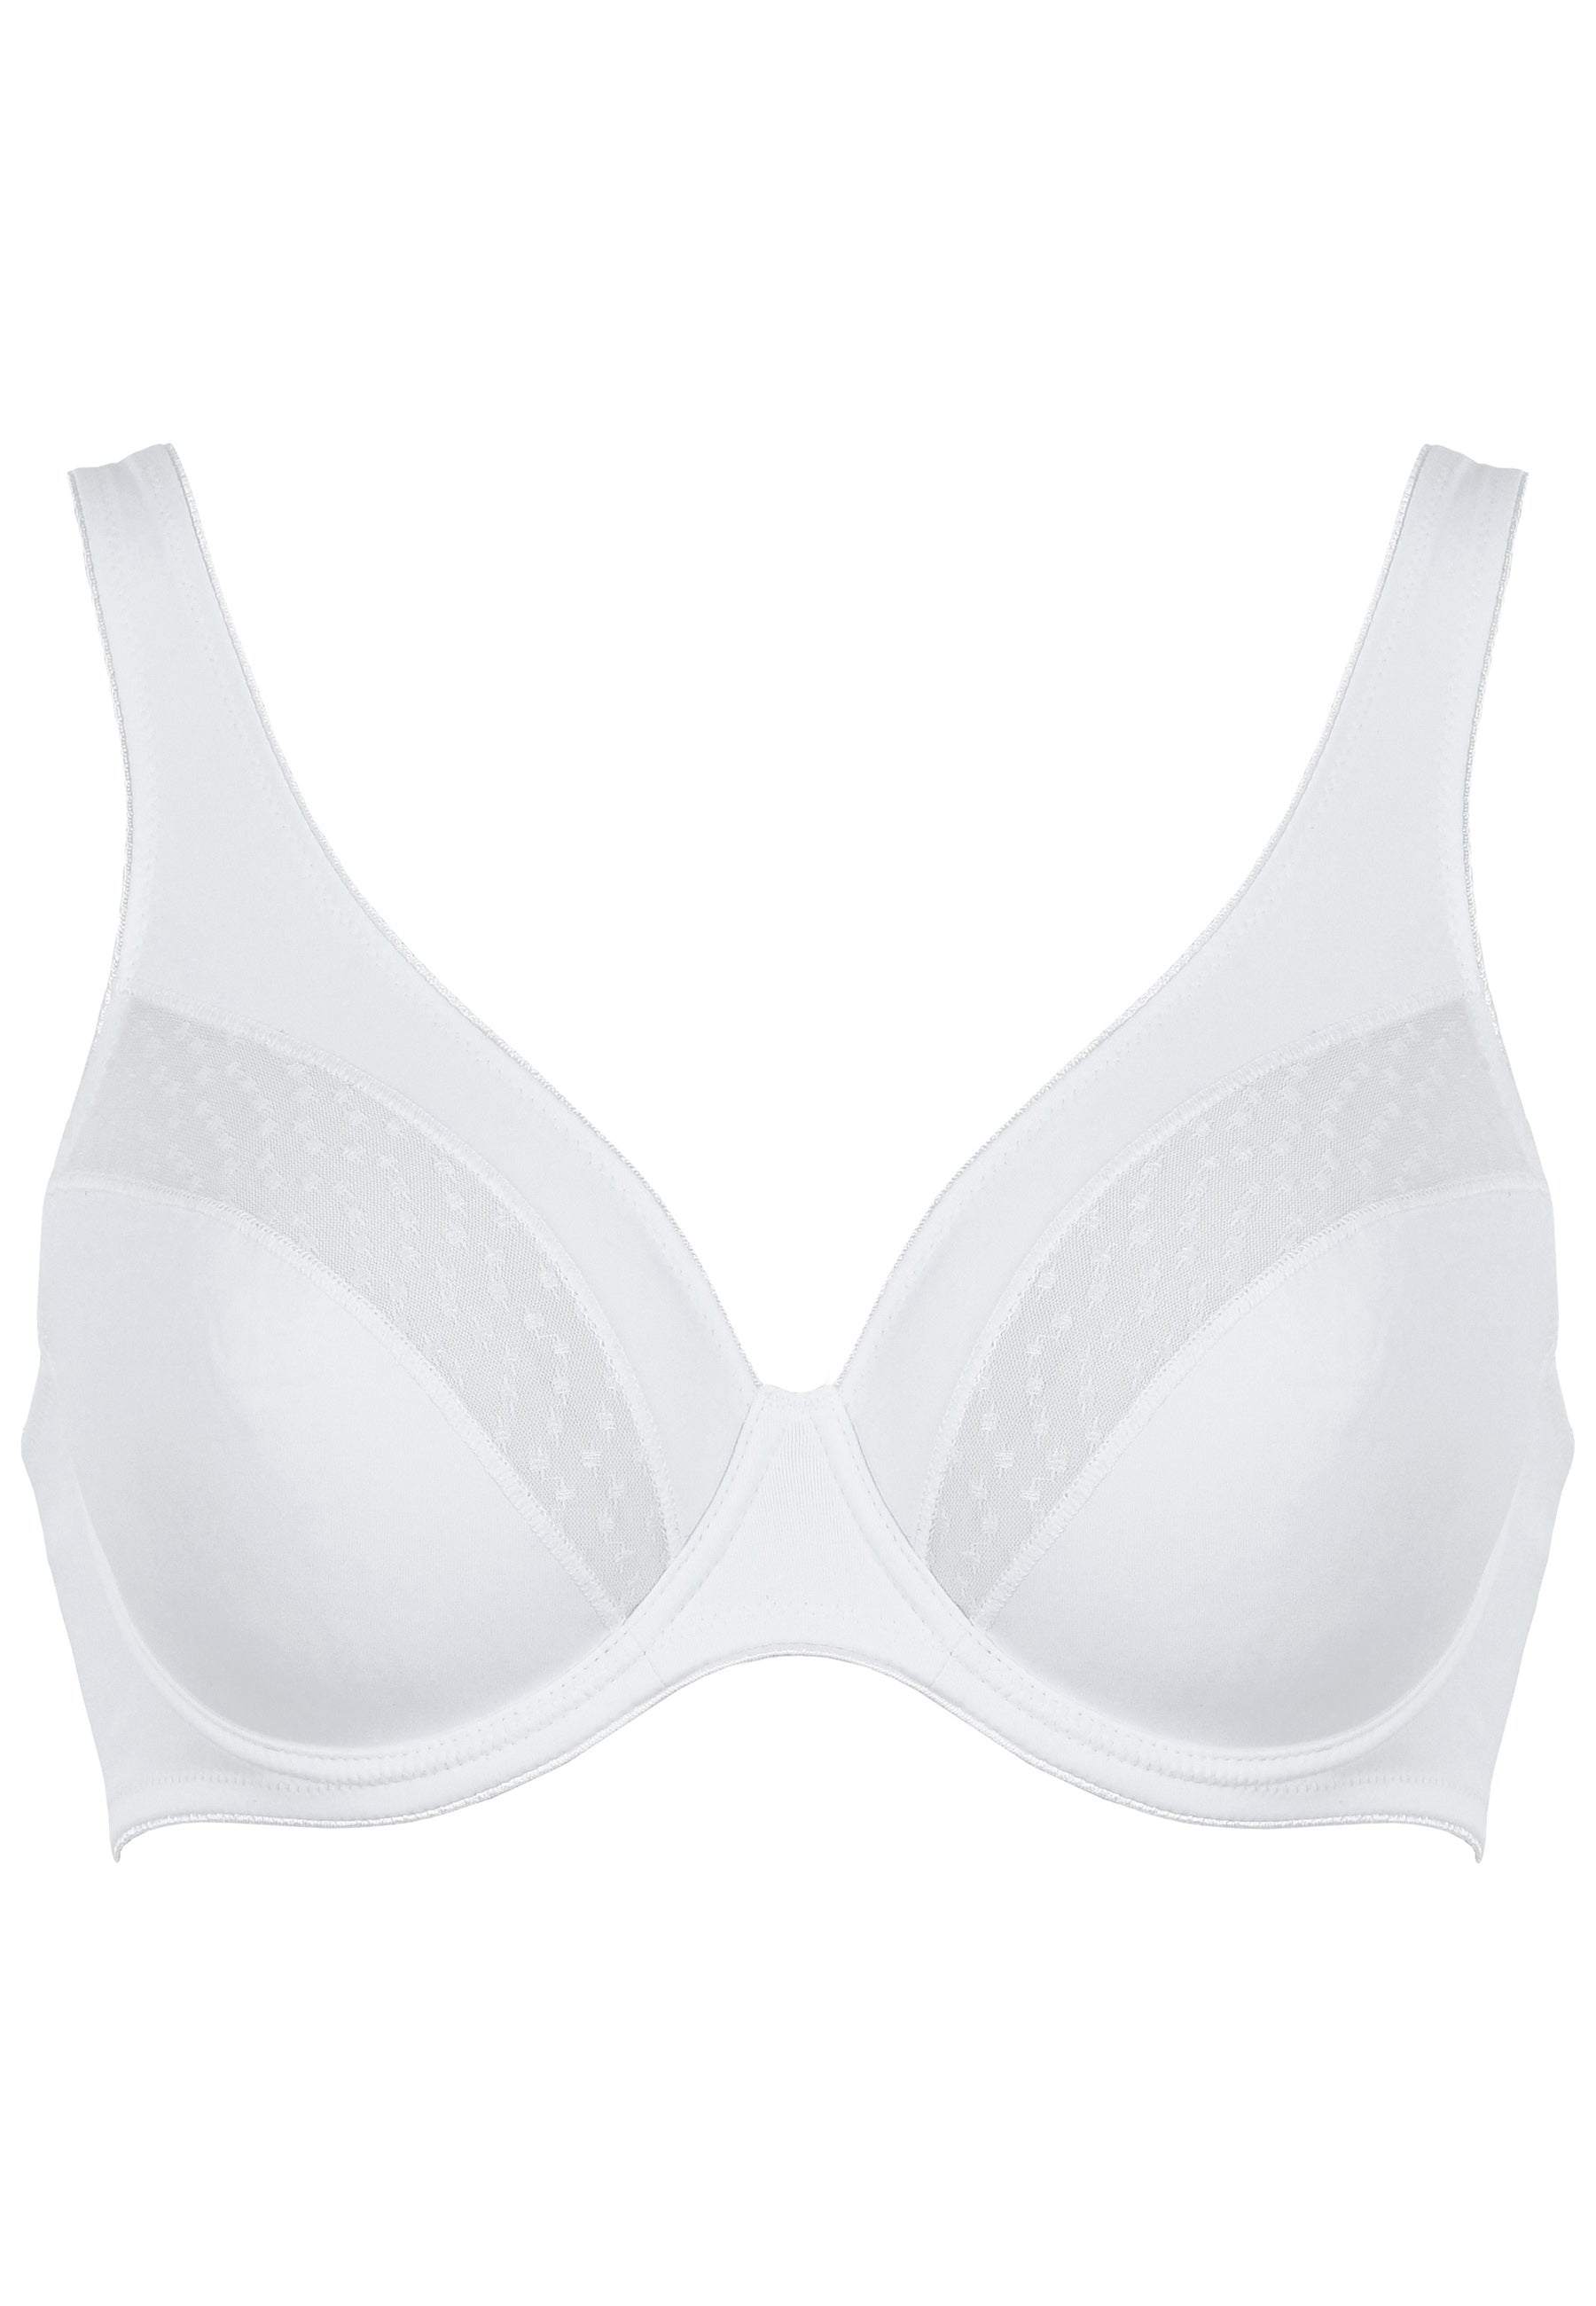 Wired Bra with Lace Details - White